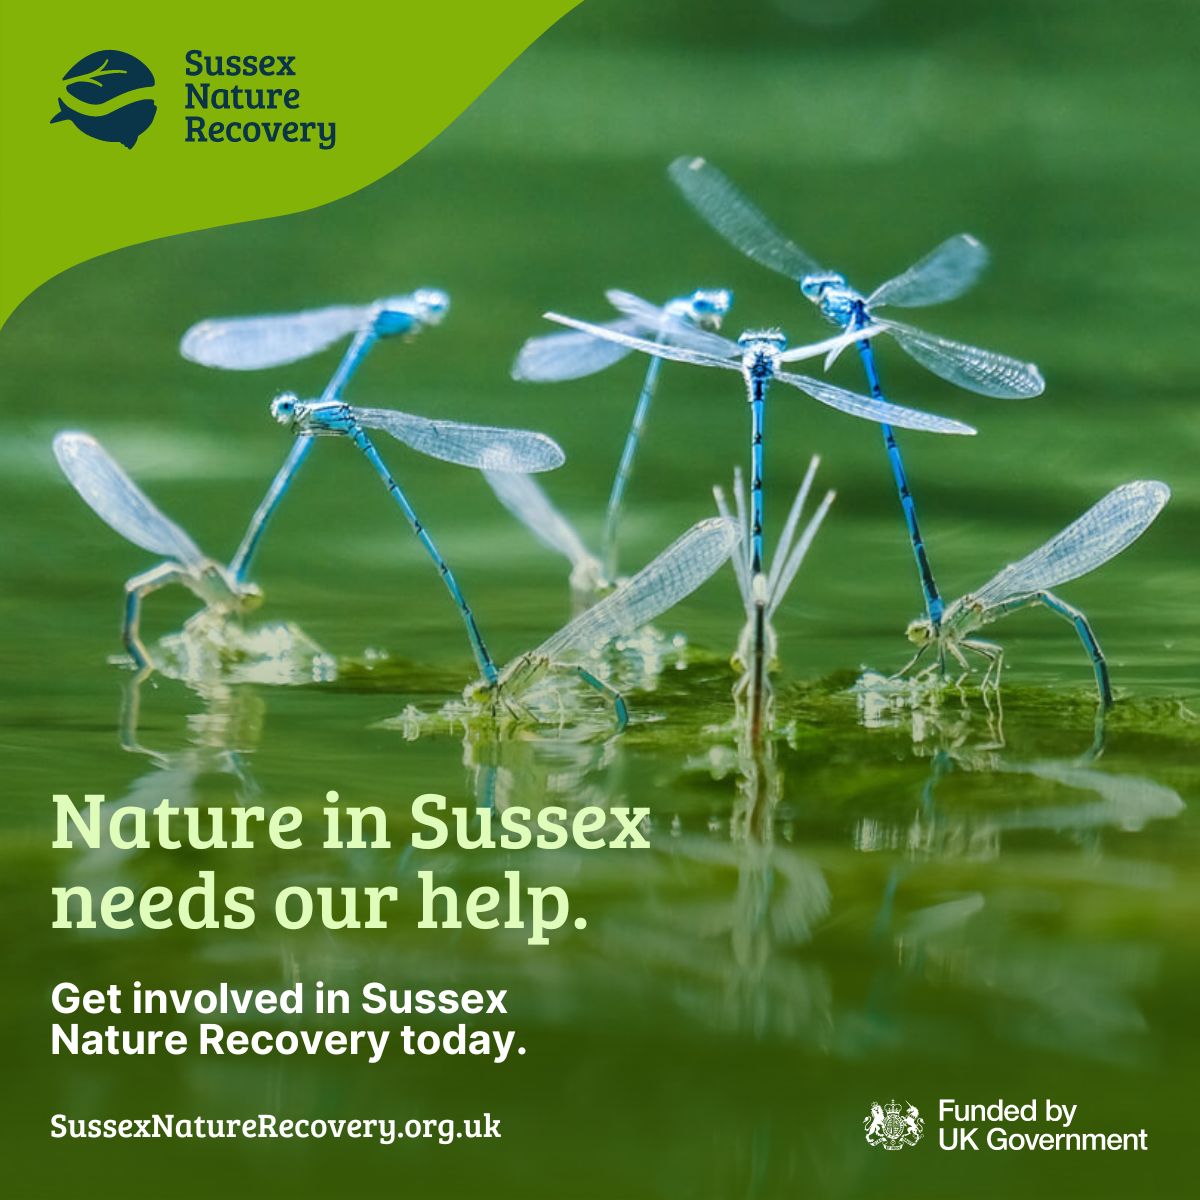 Live in Sussex? Have your say to help nature locally. Tell us about the wildlife and places for nature you love by taking our public survey. surveymonkey.com/r/RKB8RSM #SussexNatureRecovery #SussexLNRS #HelpSussexNature